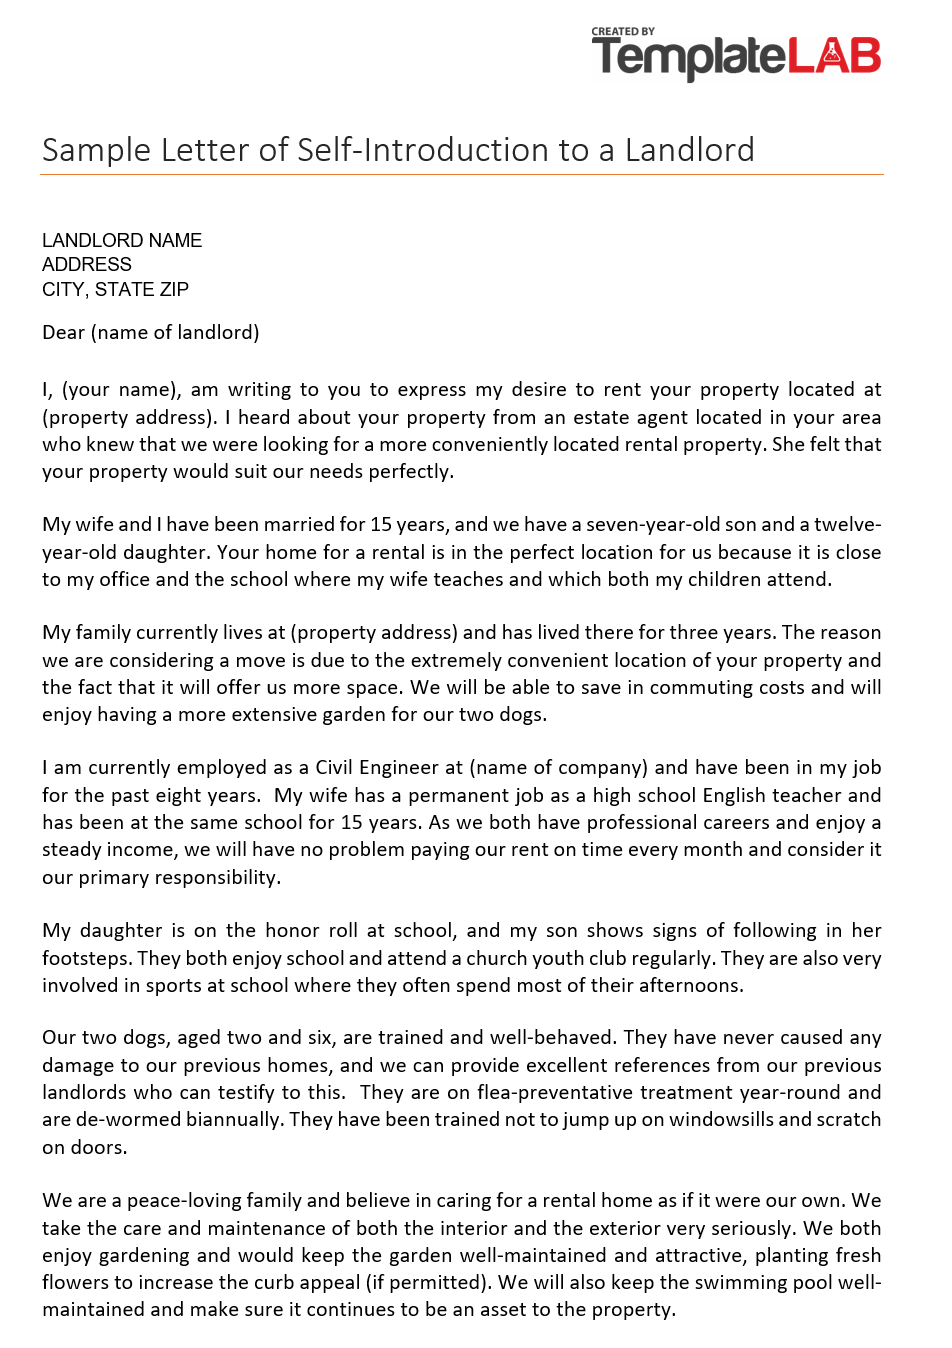 Sample Self Introduction Letter from templatelab.com